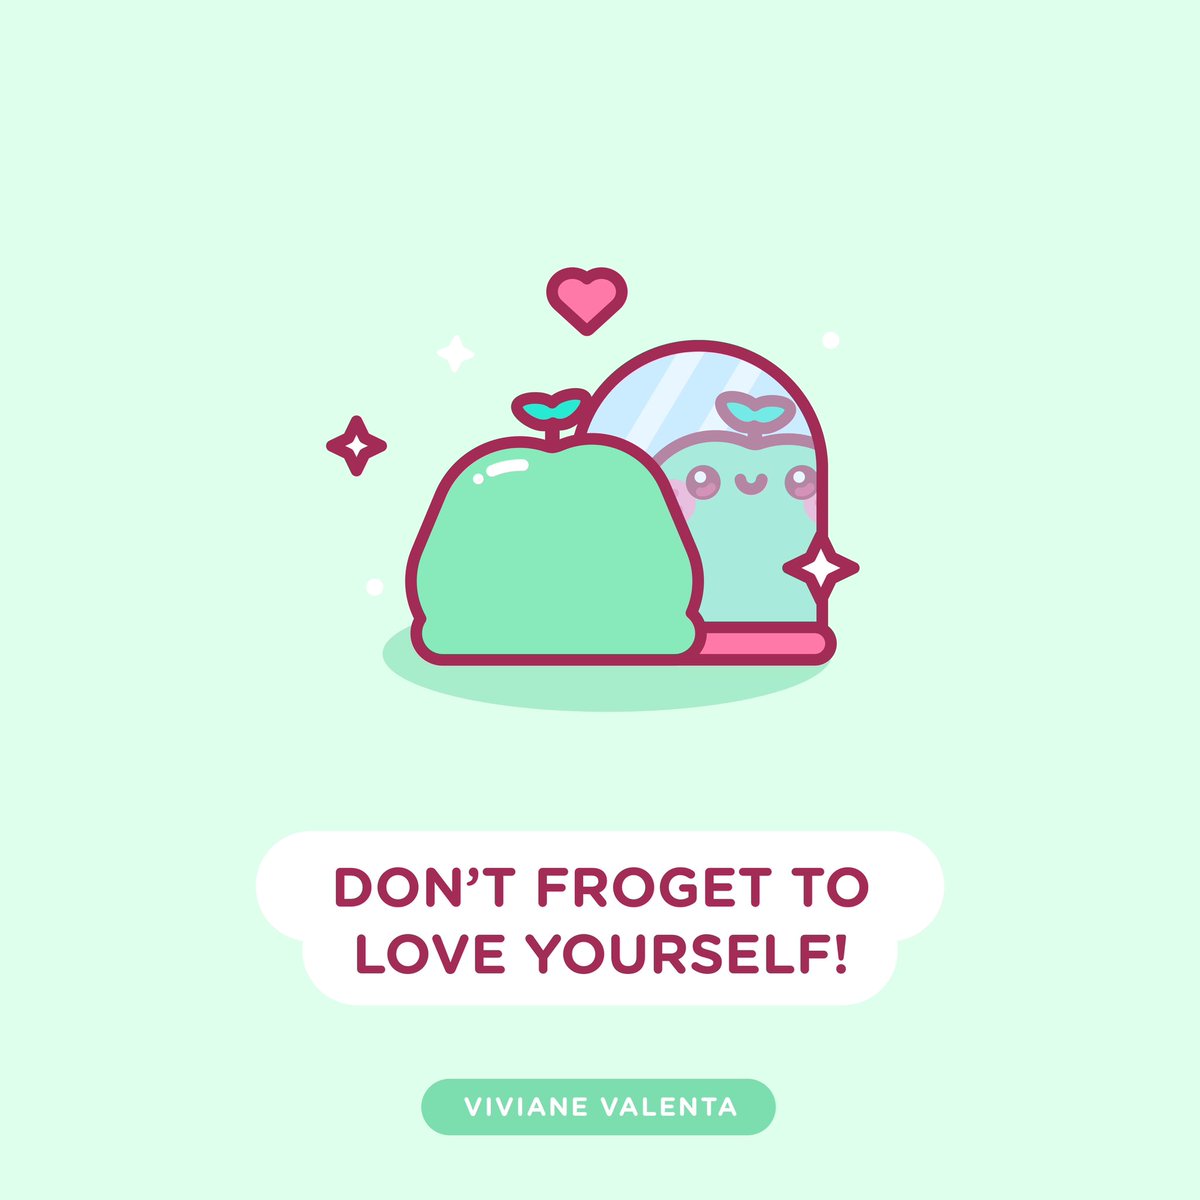 Don’t Froget to love yourself!